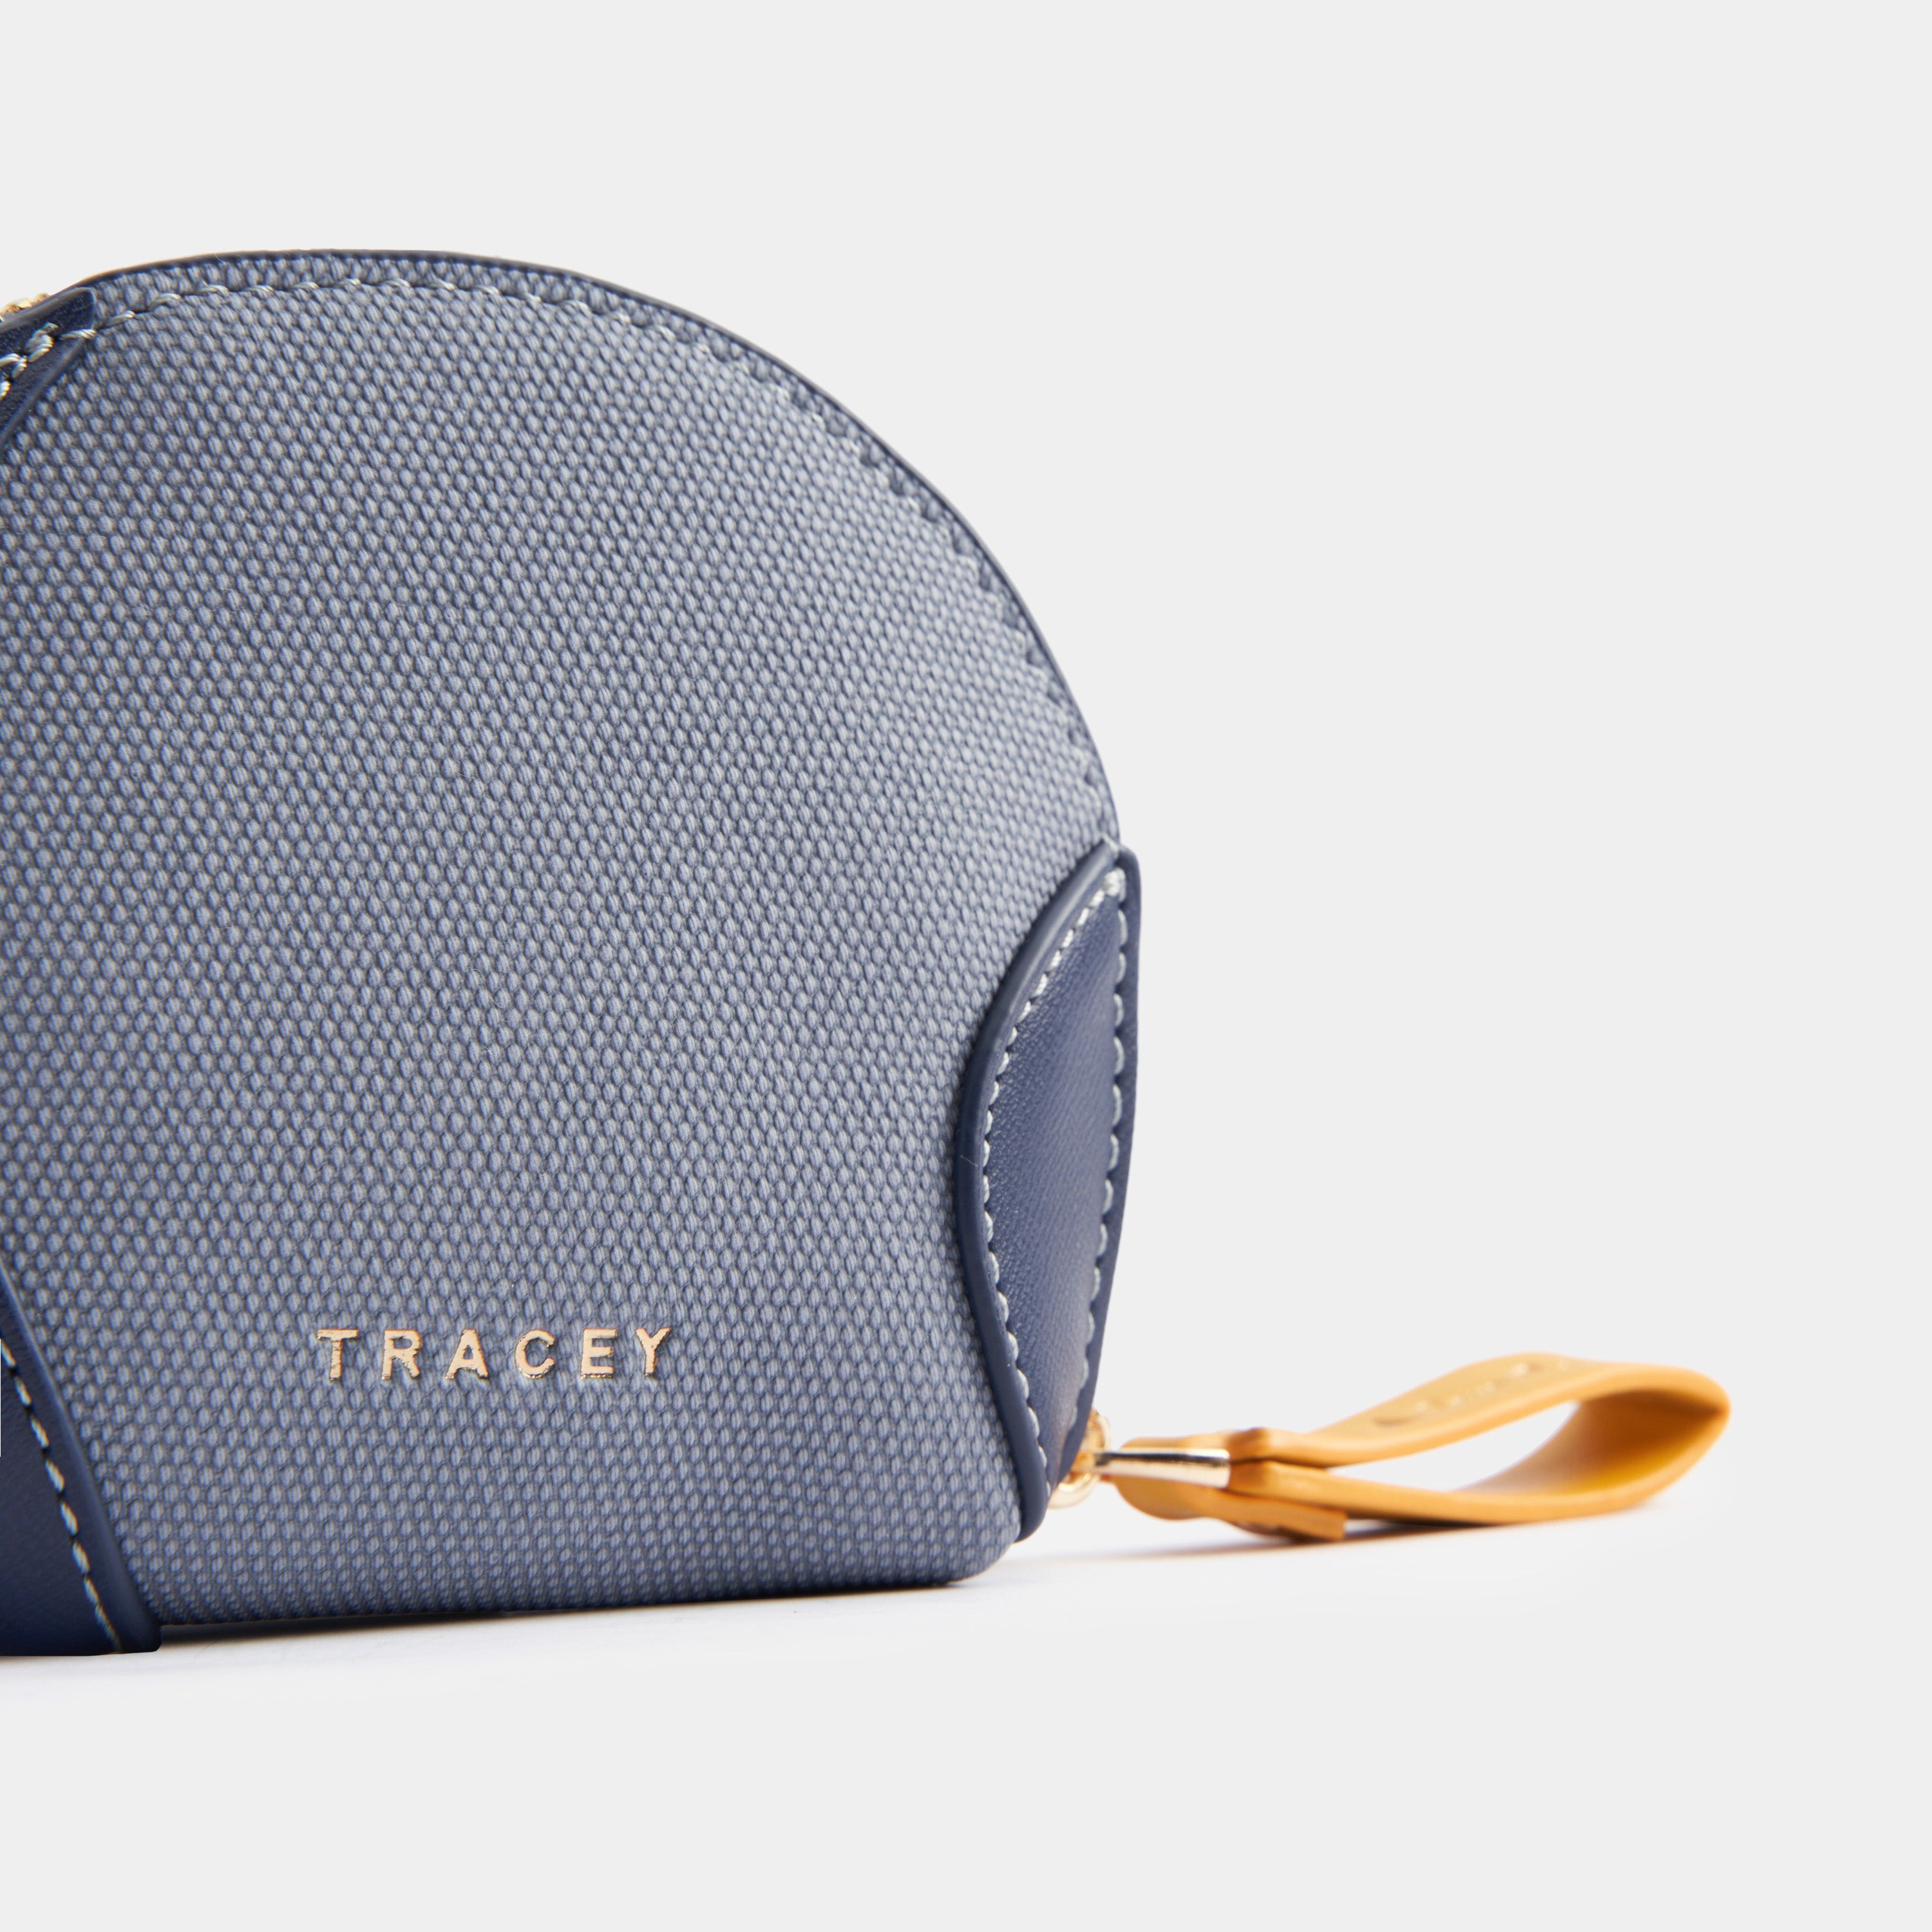 Tracey x Save The Tapir Mini Pouch Bag